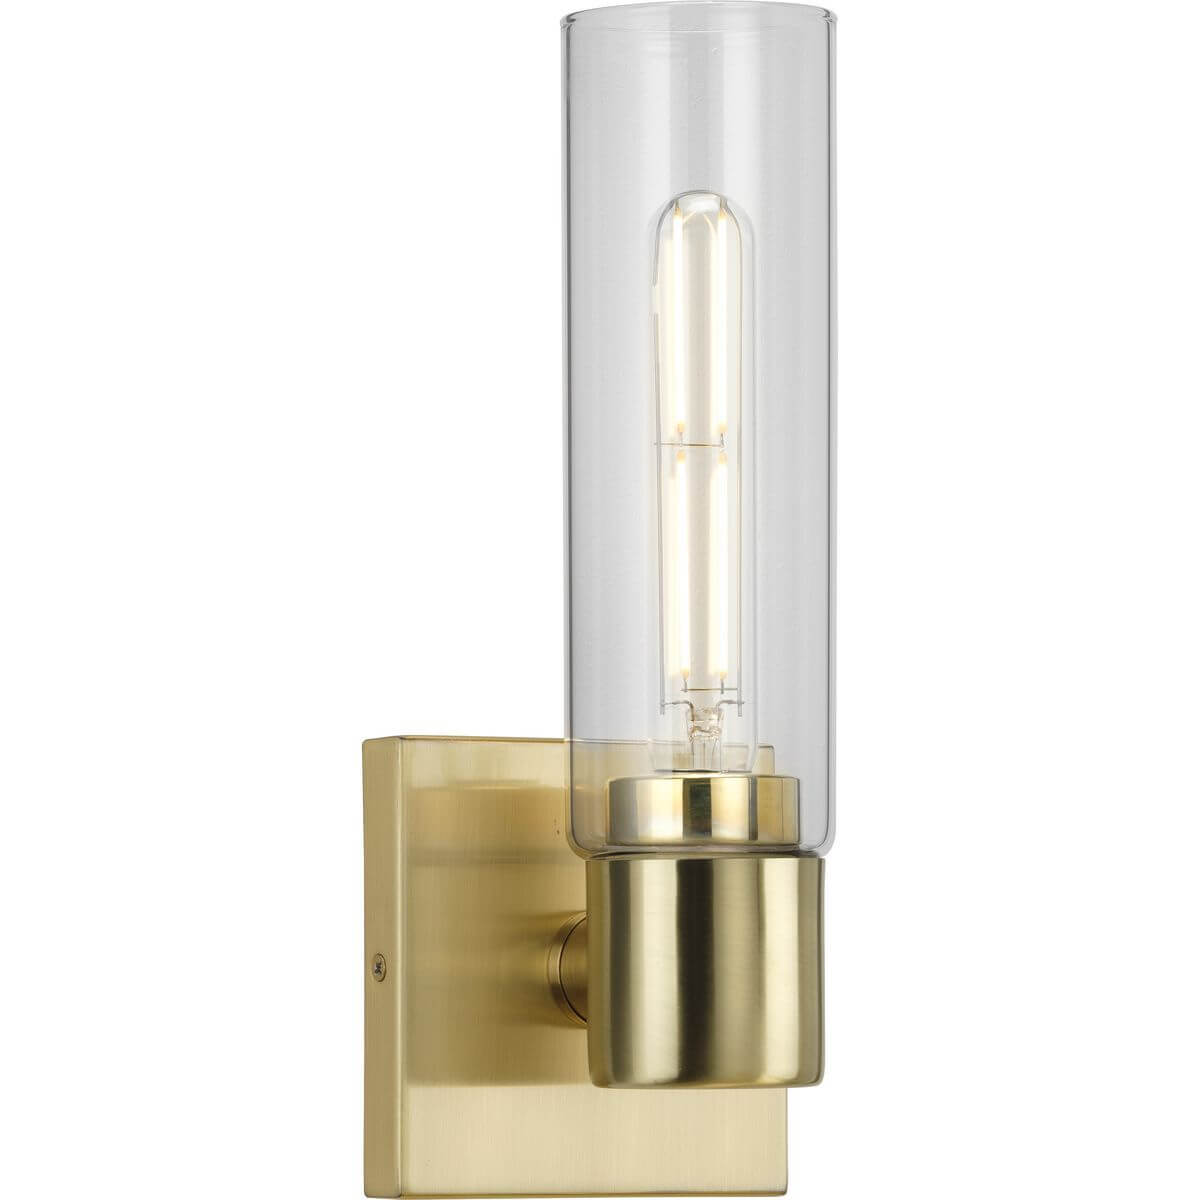 Progress Lighting Clarion 1 Light 13 inch Tall Bath Vanity Light in Satin Brass with Clear Glass P300299-012